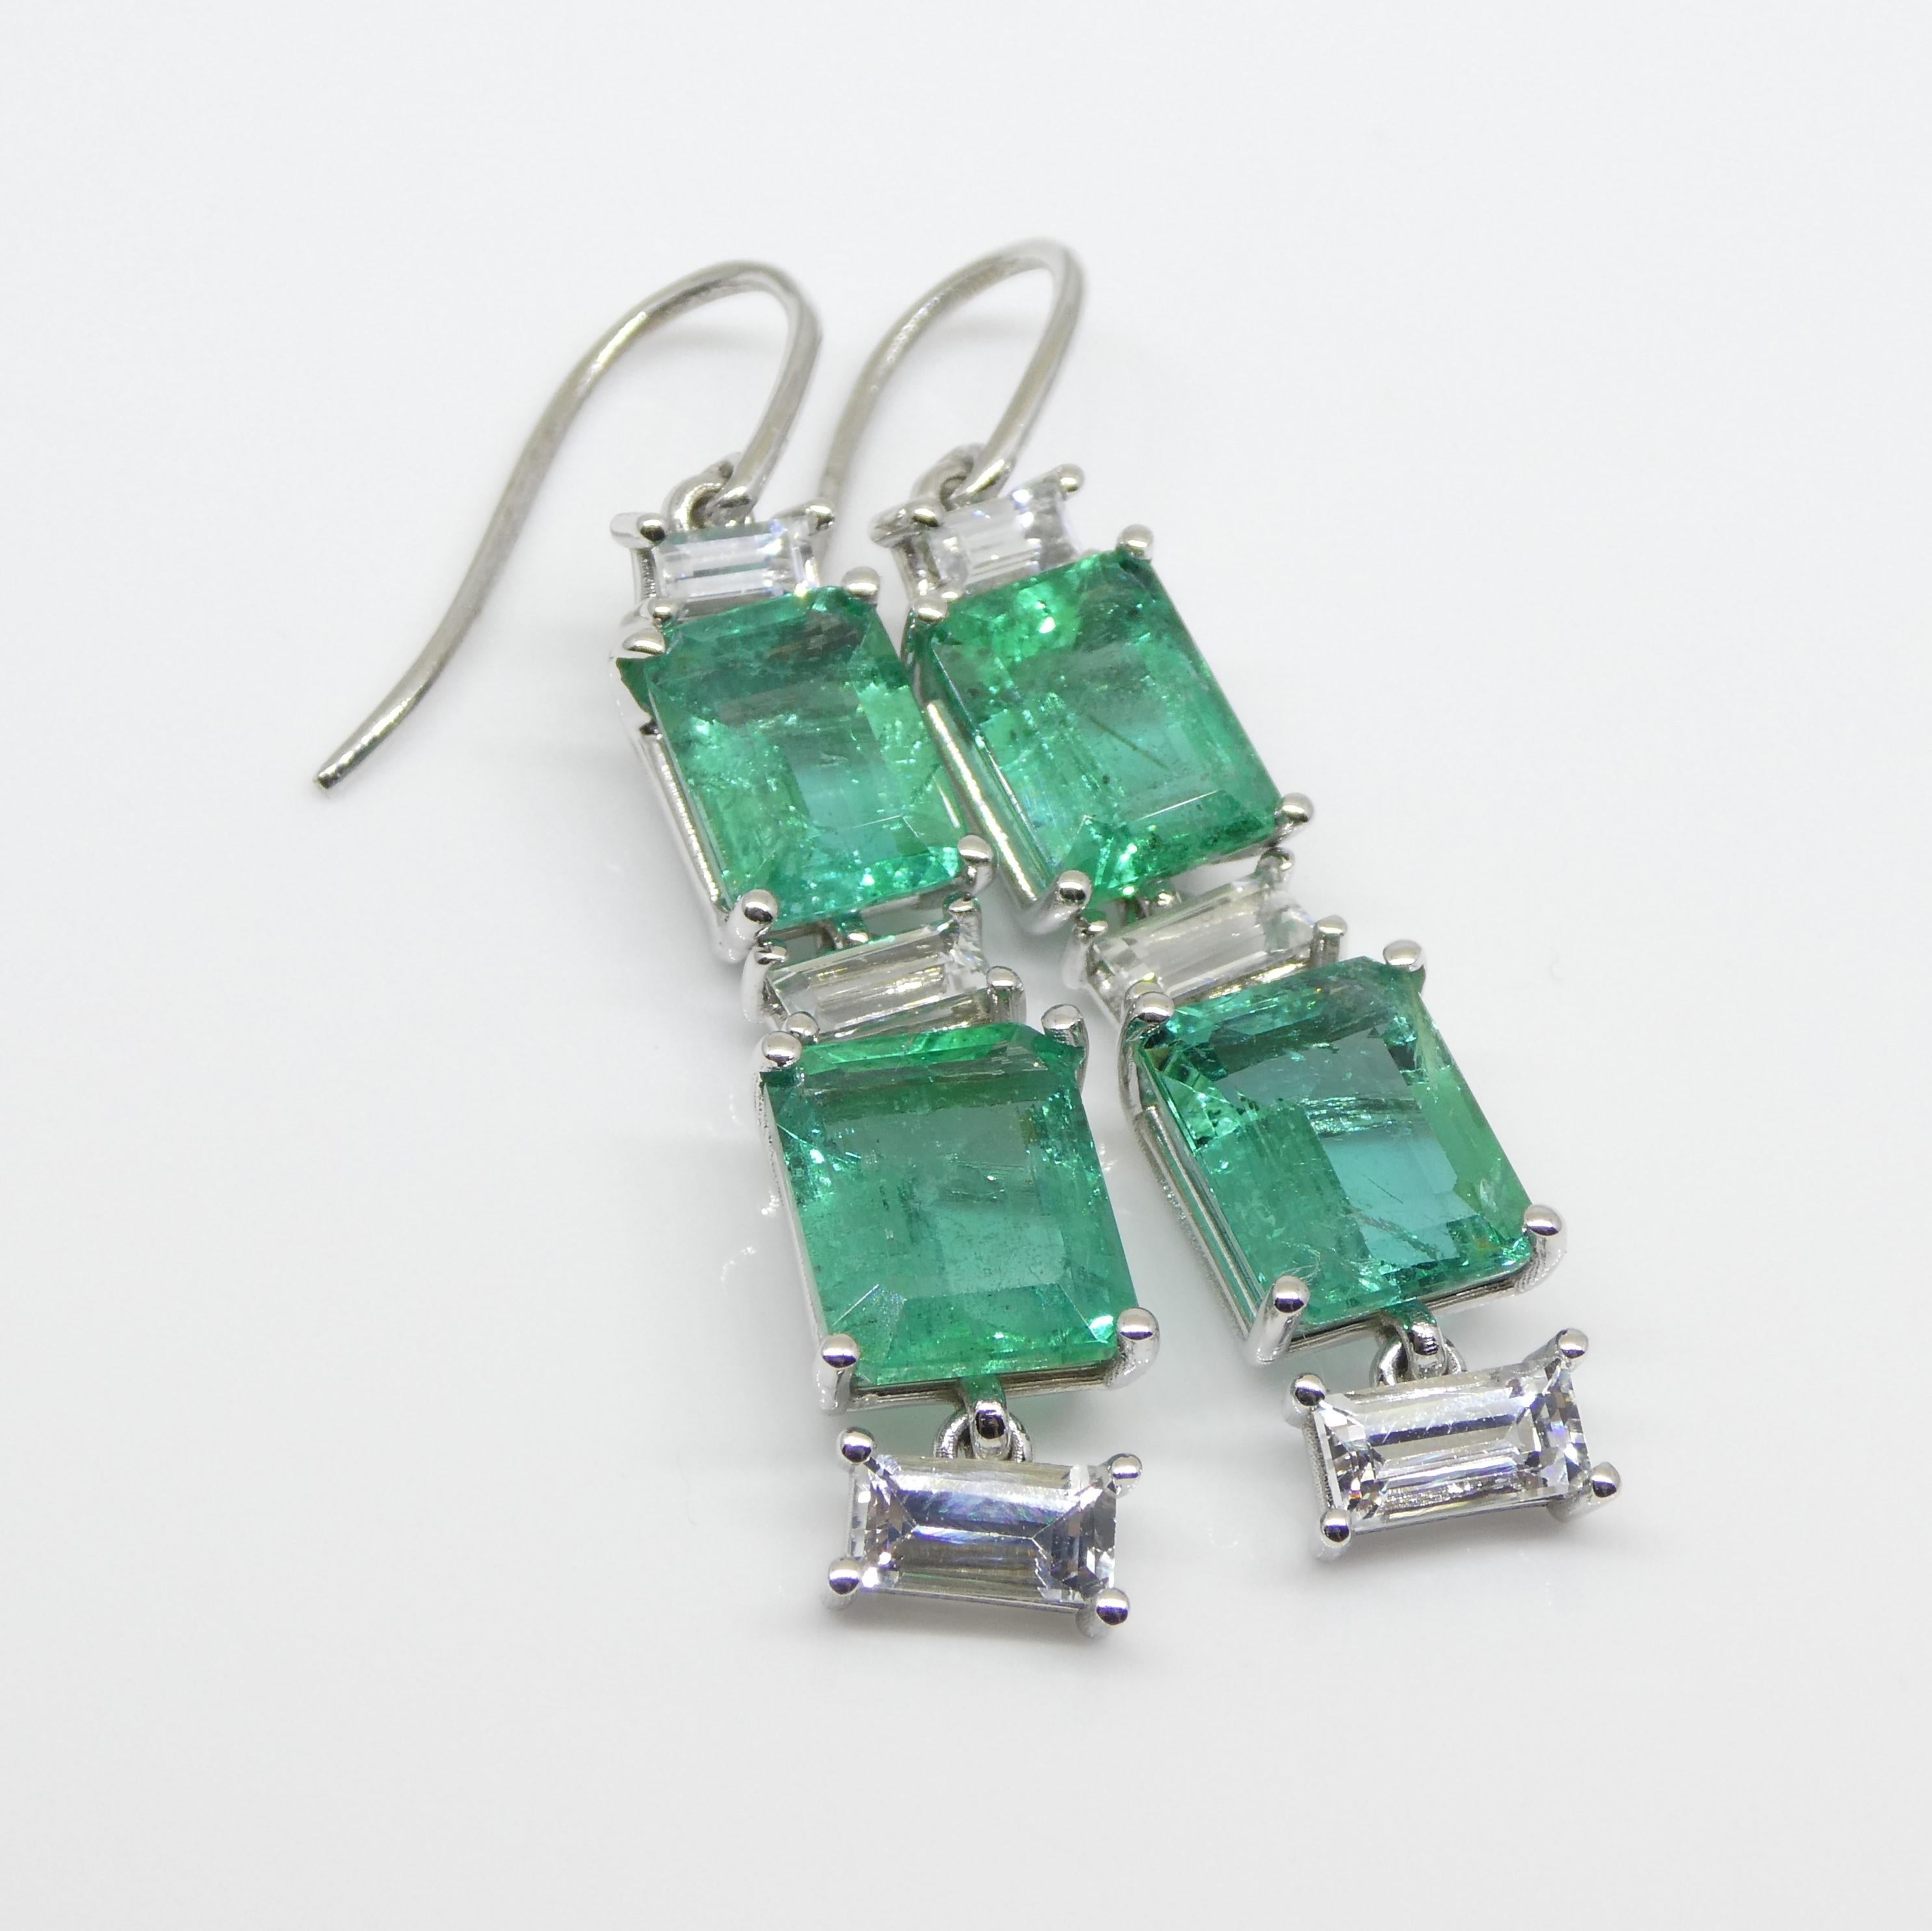 7.80ct Emerald, 1.80ct White Sapphire Earrings in 14k White Gold 11